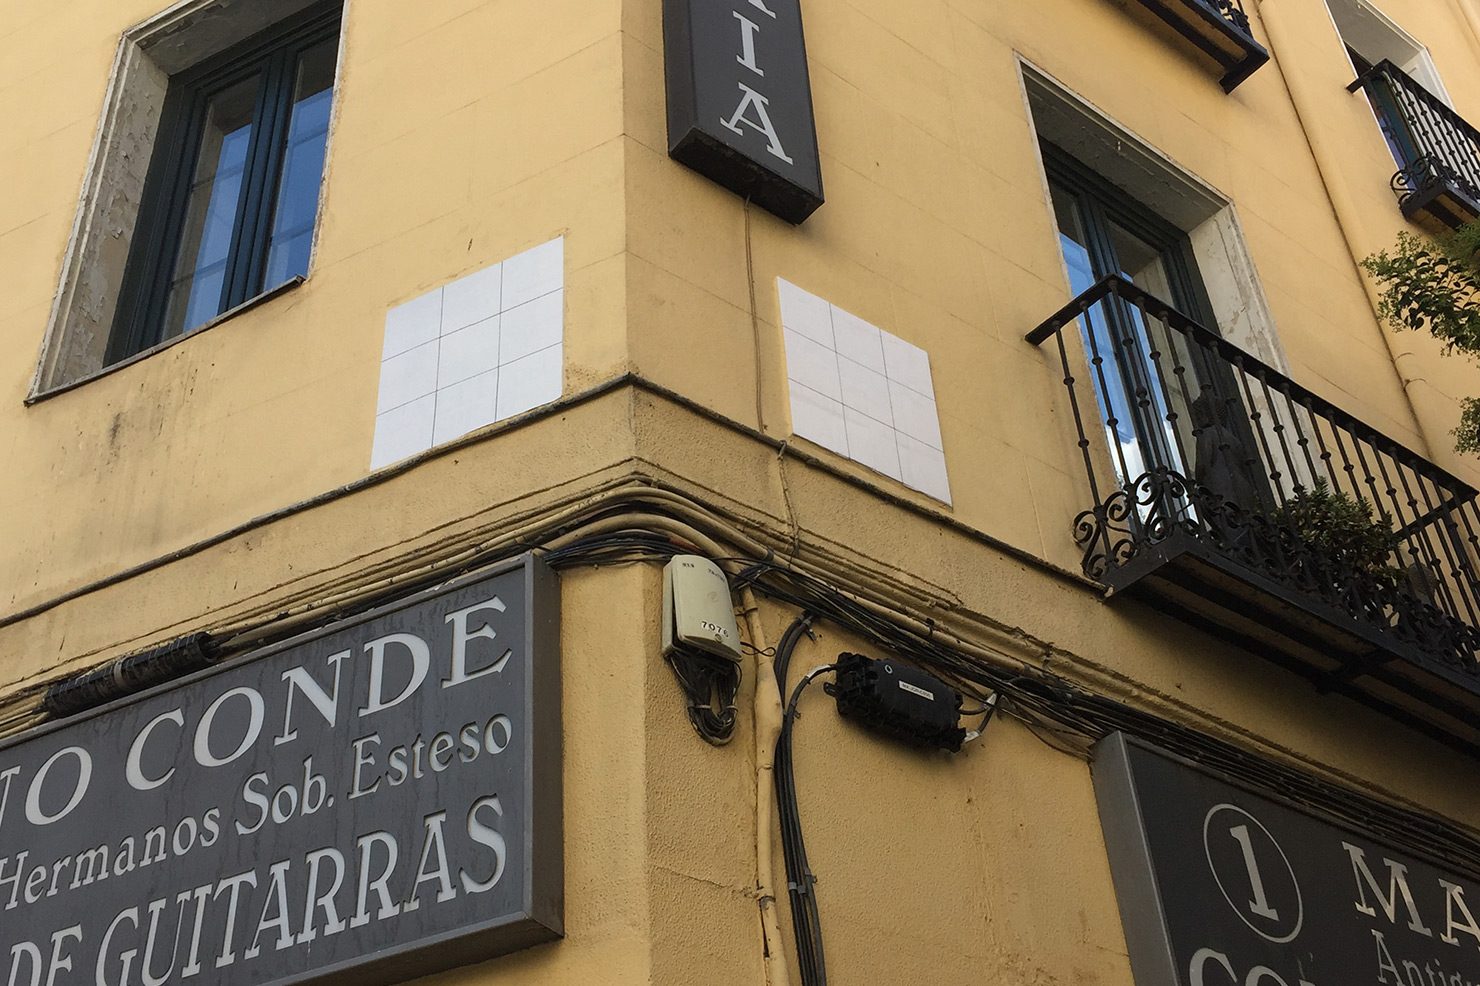 Blanked out street signs in central Madrid. Part of the #CallesEnBlanco initiative.